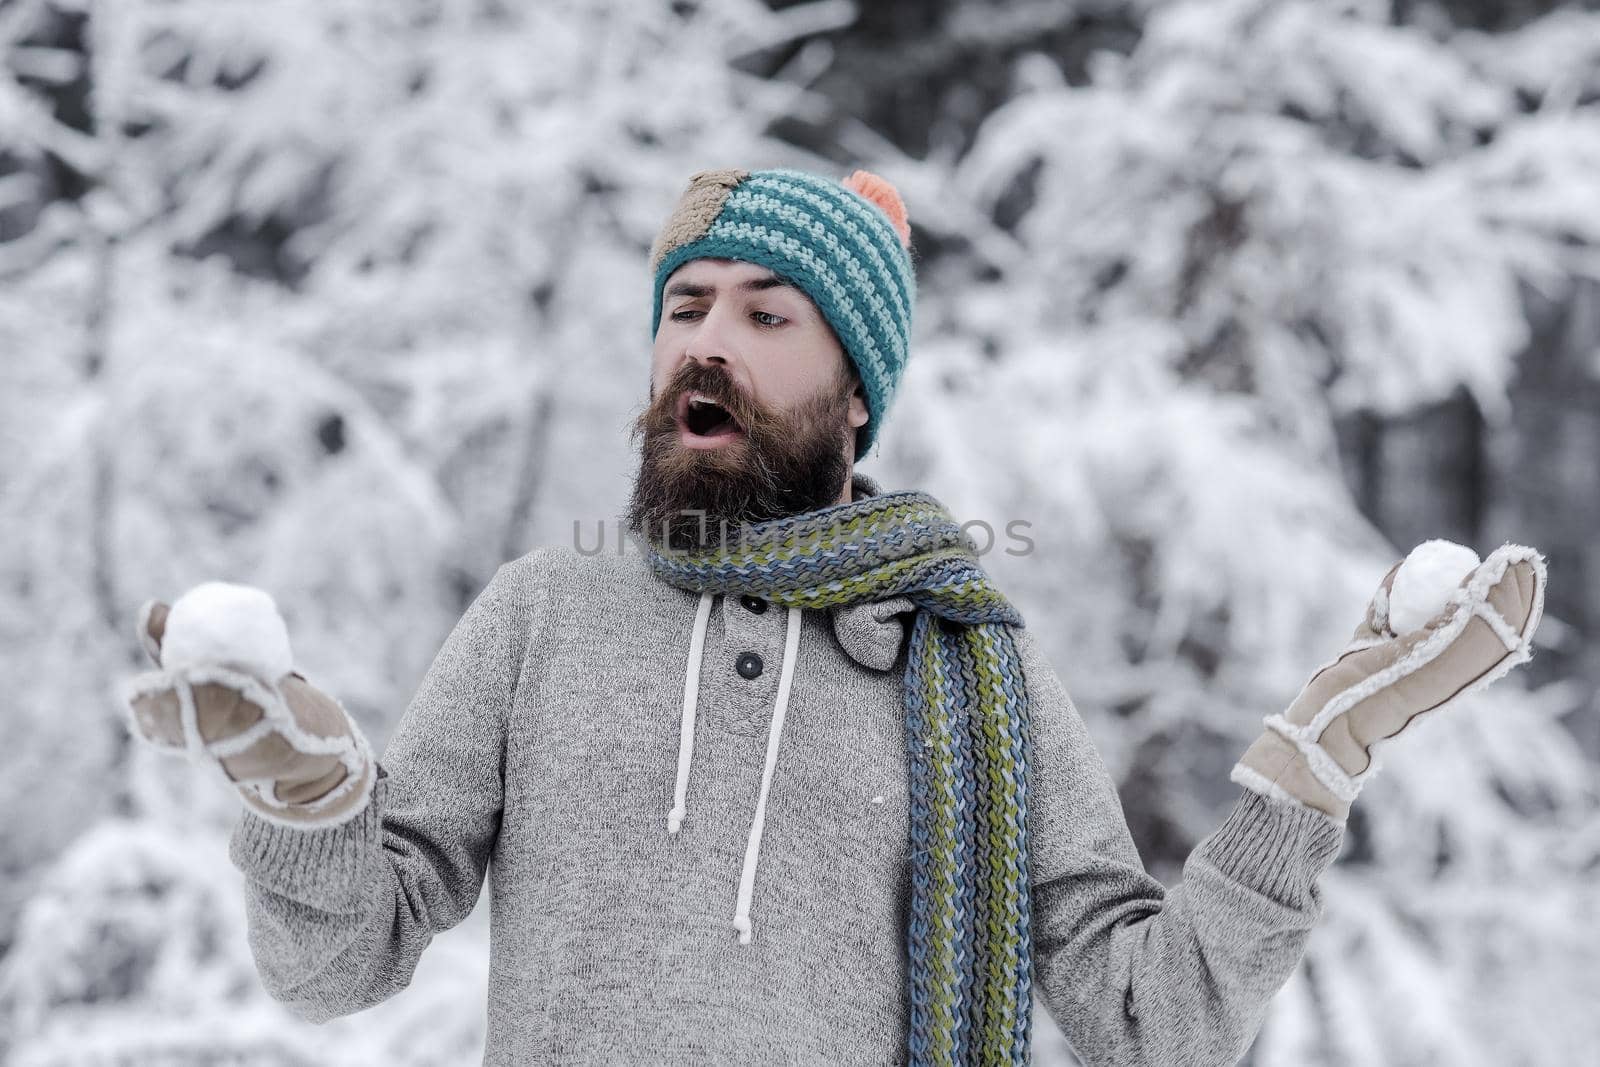 Bearded man with snowballs in snowy forest. Skincare, beard care in winter. Hipster in jacket, hat, scarf, beard warm in winter. Snow fight, winter rest by Tverdokhlib